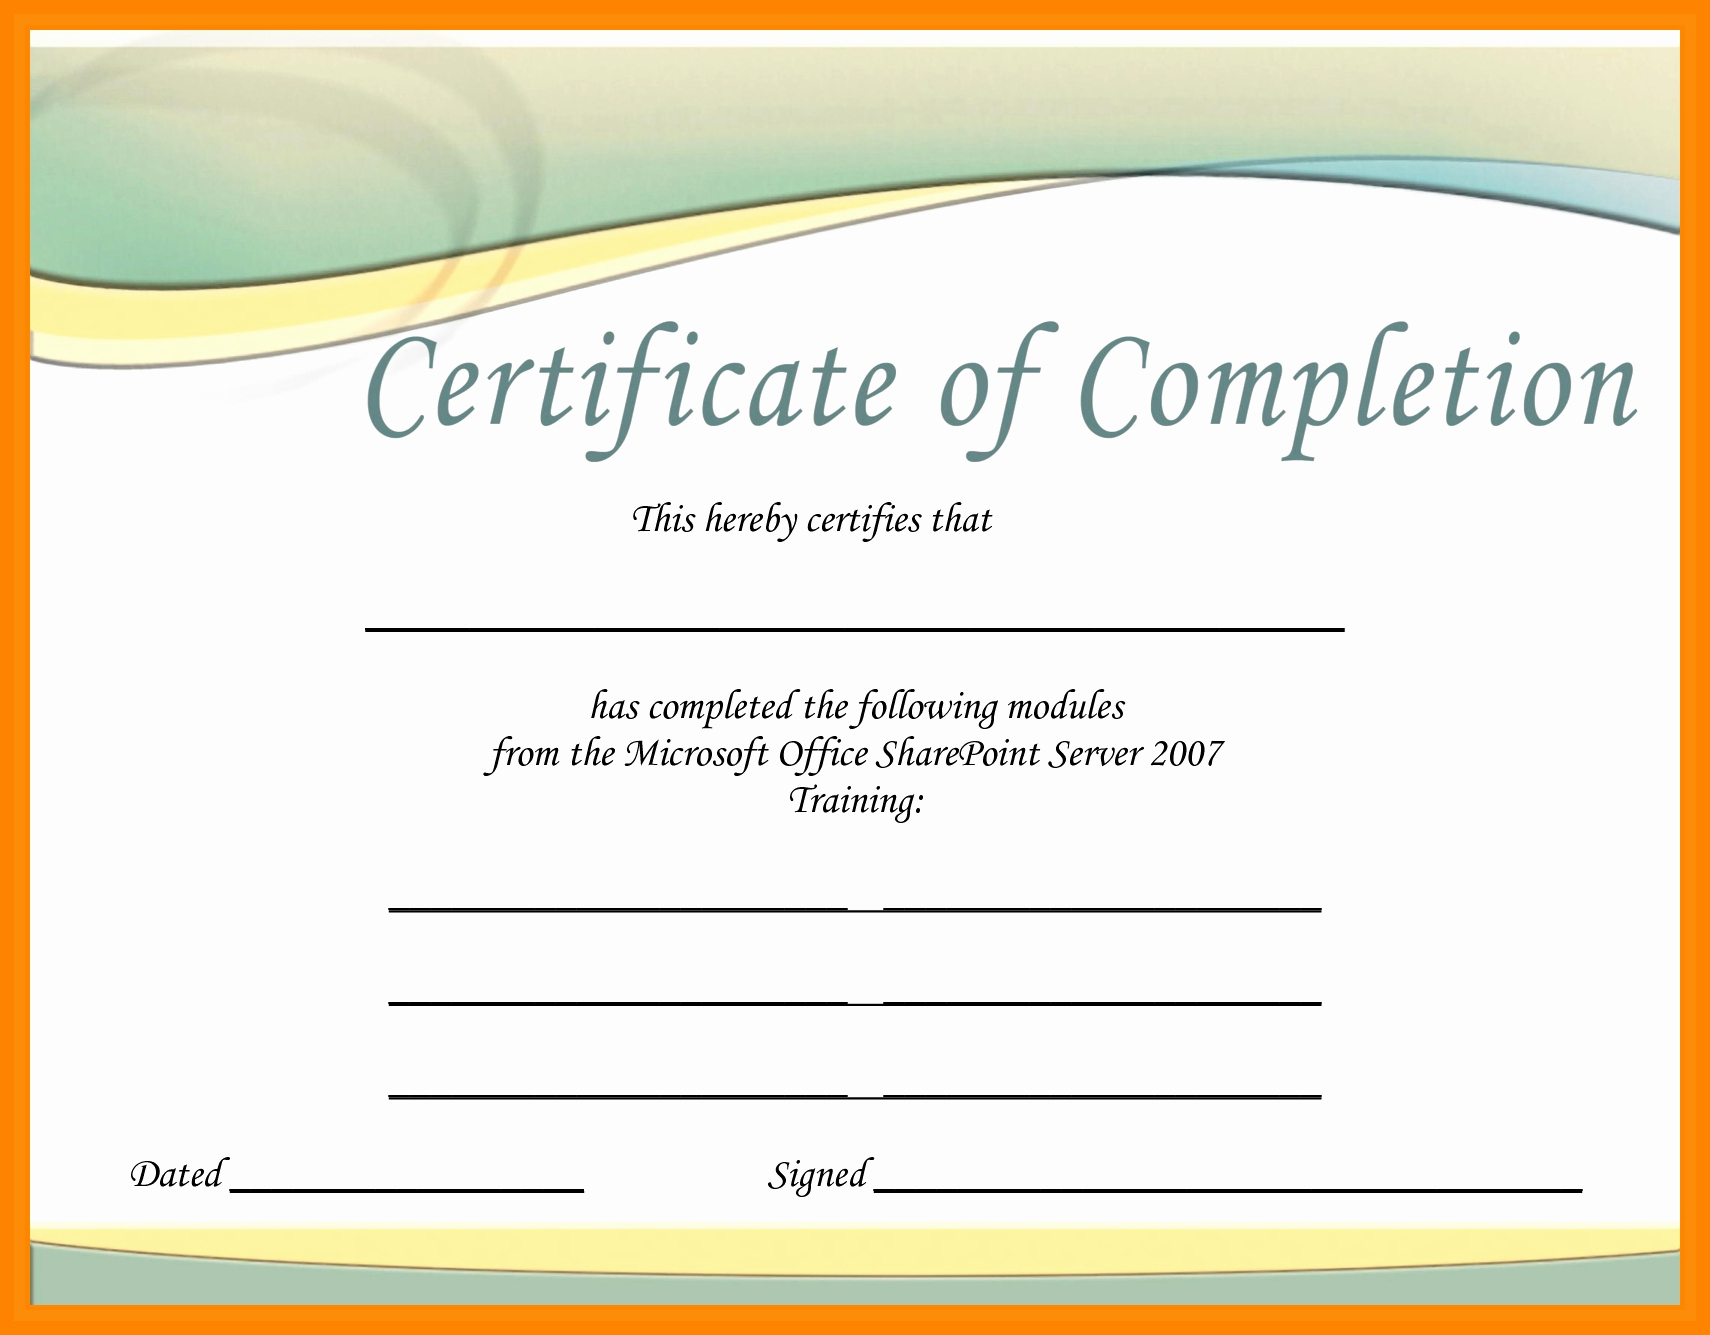 Free School Certificate Template In Microsoft Word Throughout Downloadable Certificate Templates For Microsoft Word